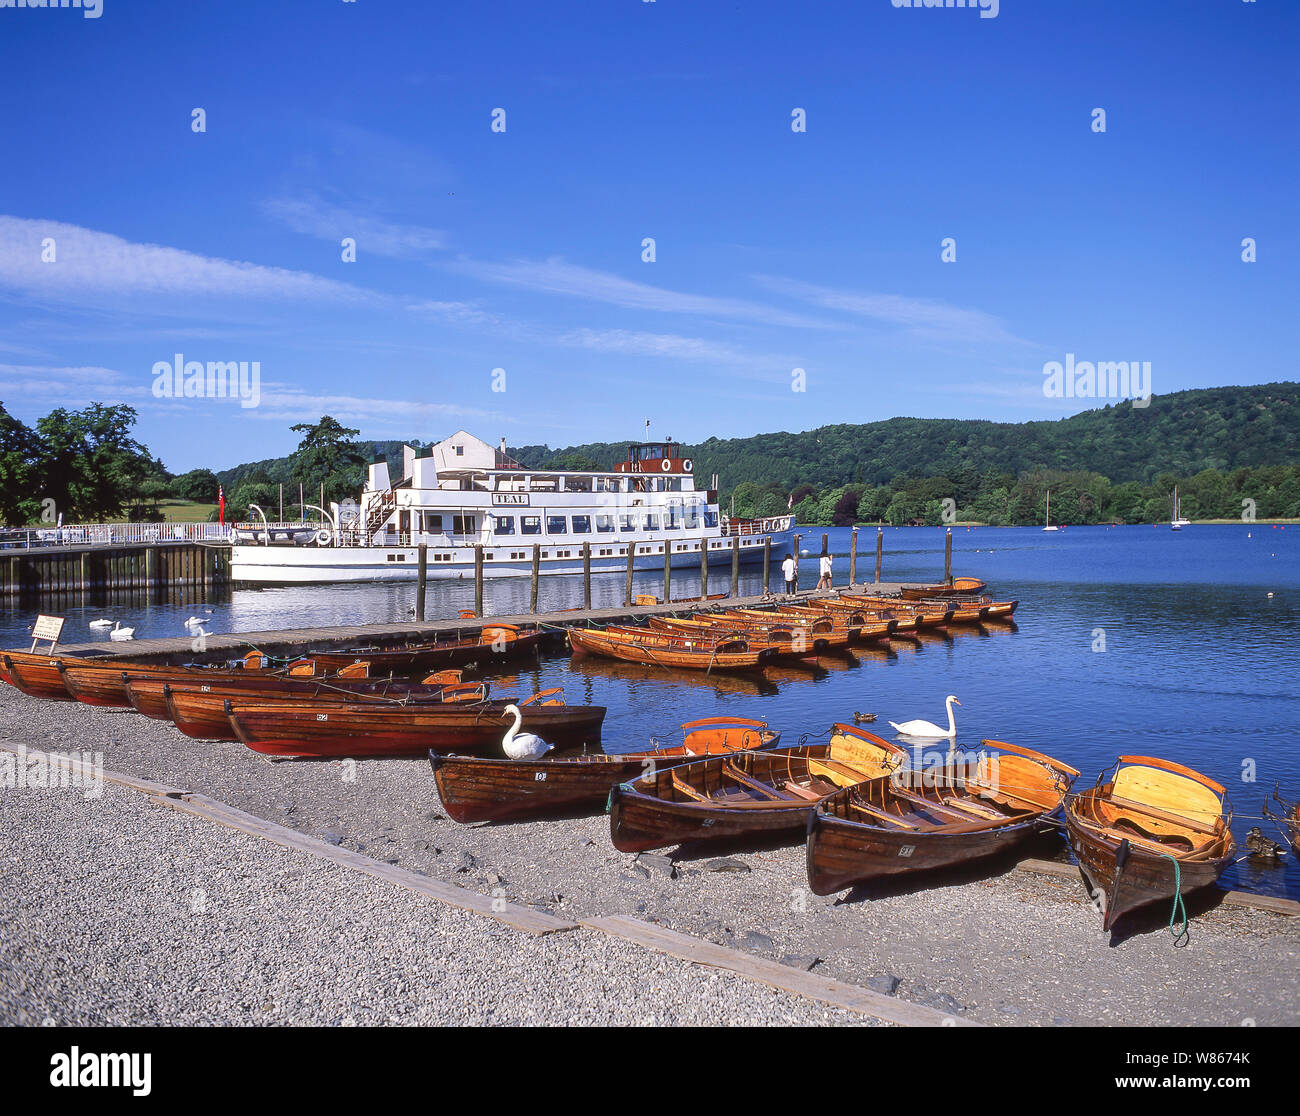 Cruise boat and rowing boats on Lake Windermere, Bowness-on-Windermere, Cumbria, England, United Kingdom Stock Photo